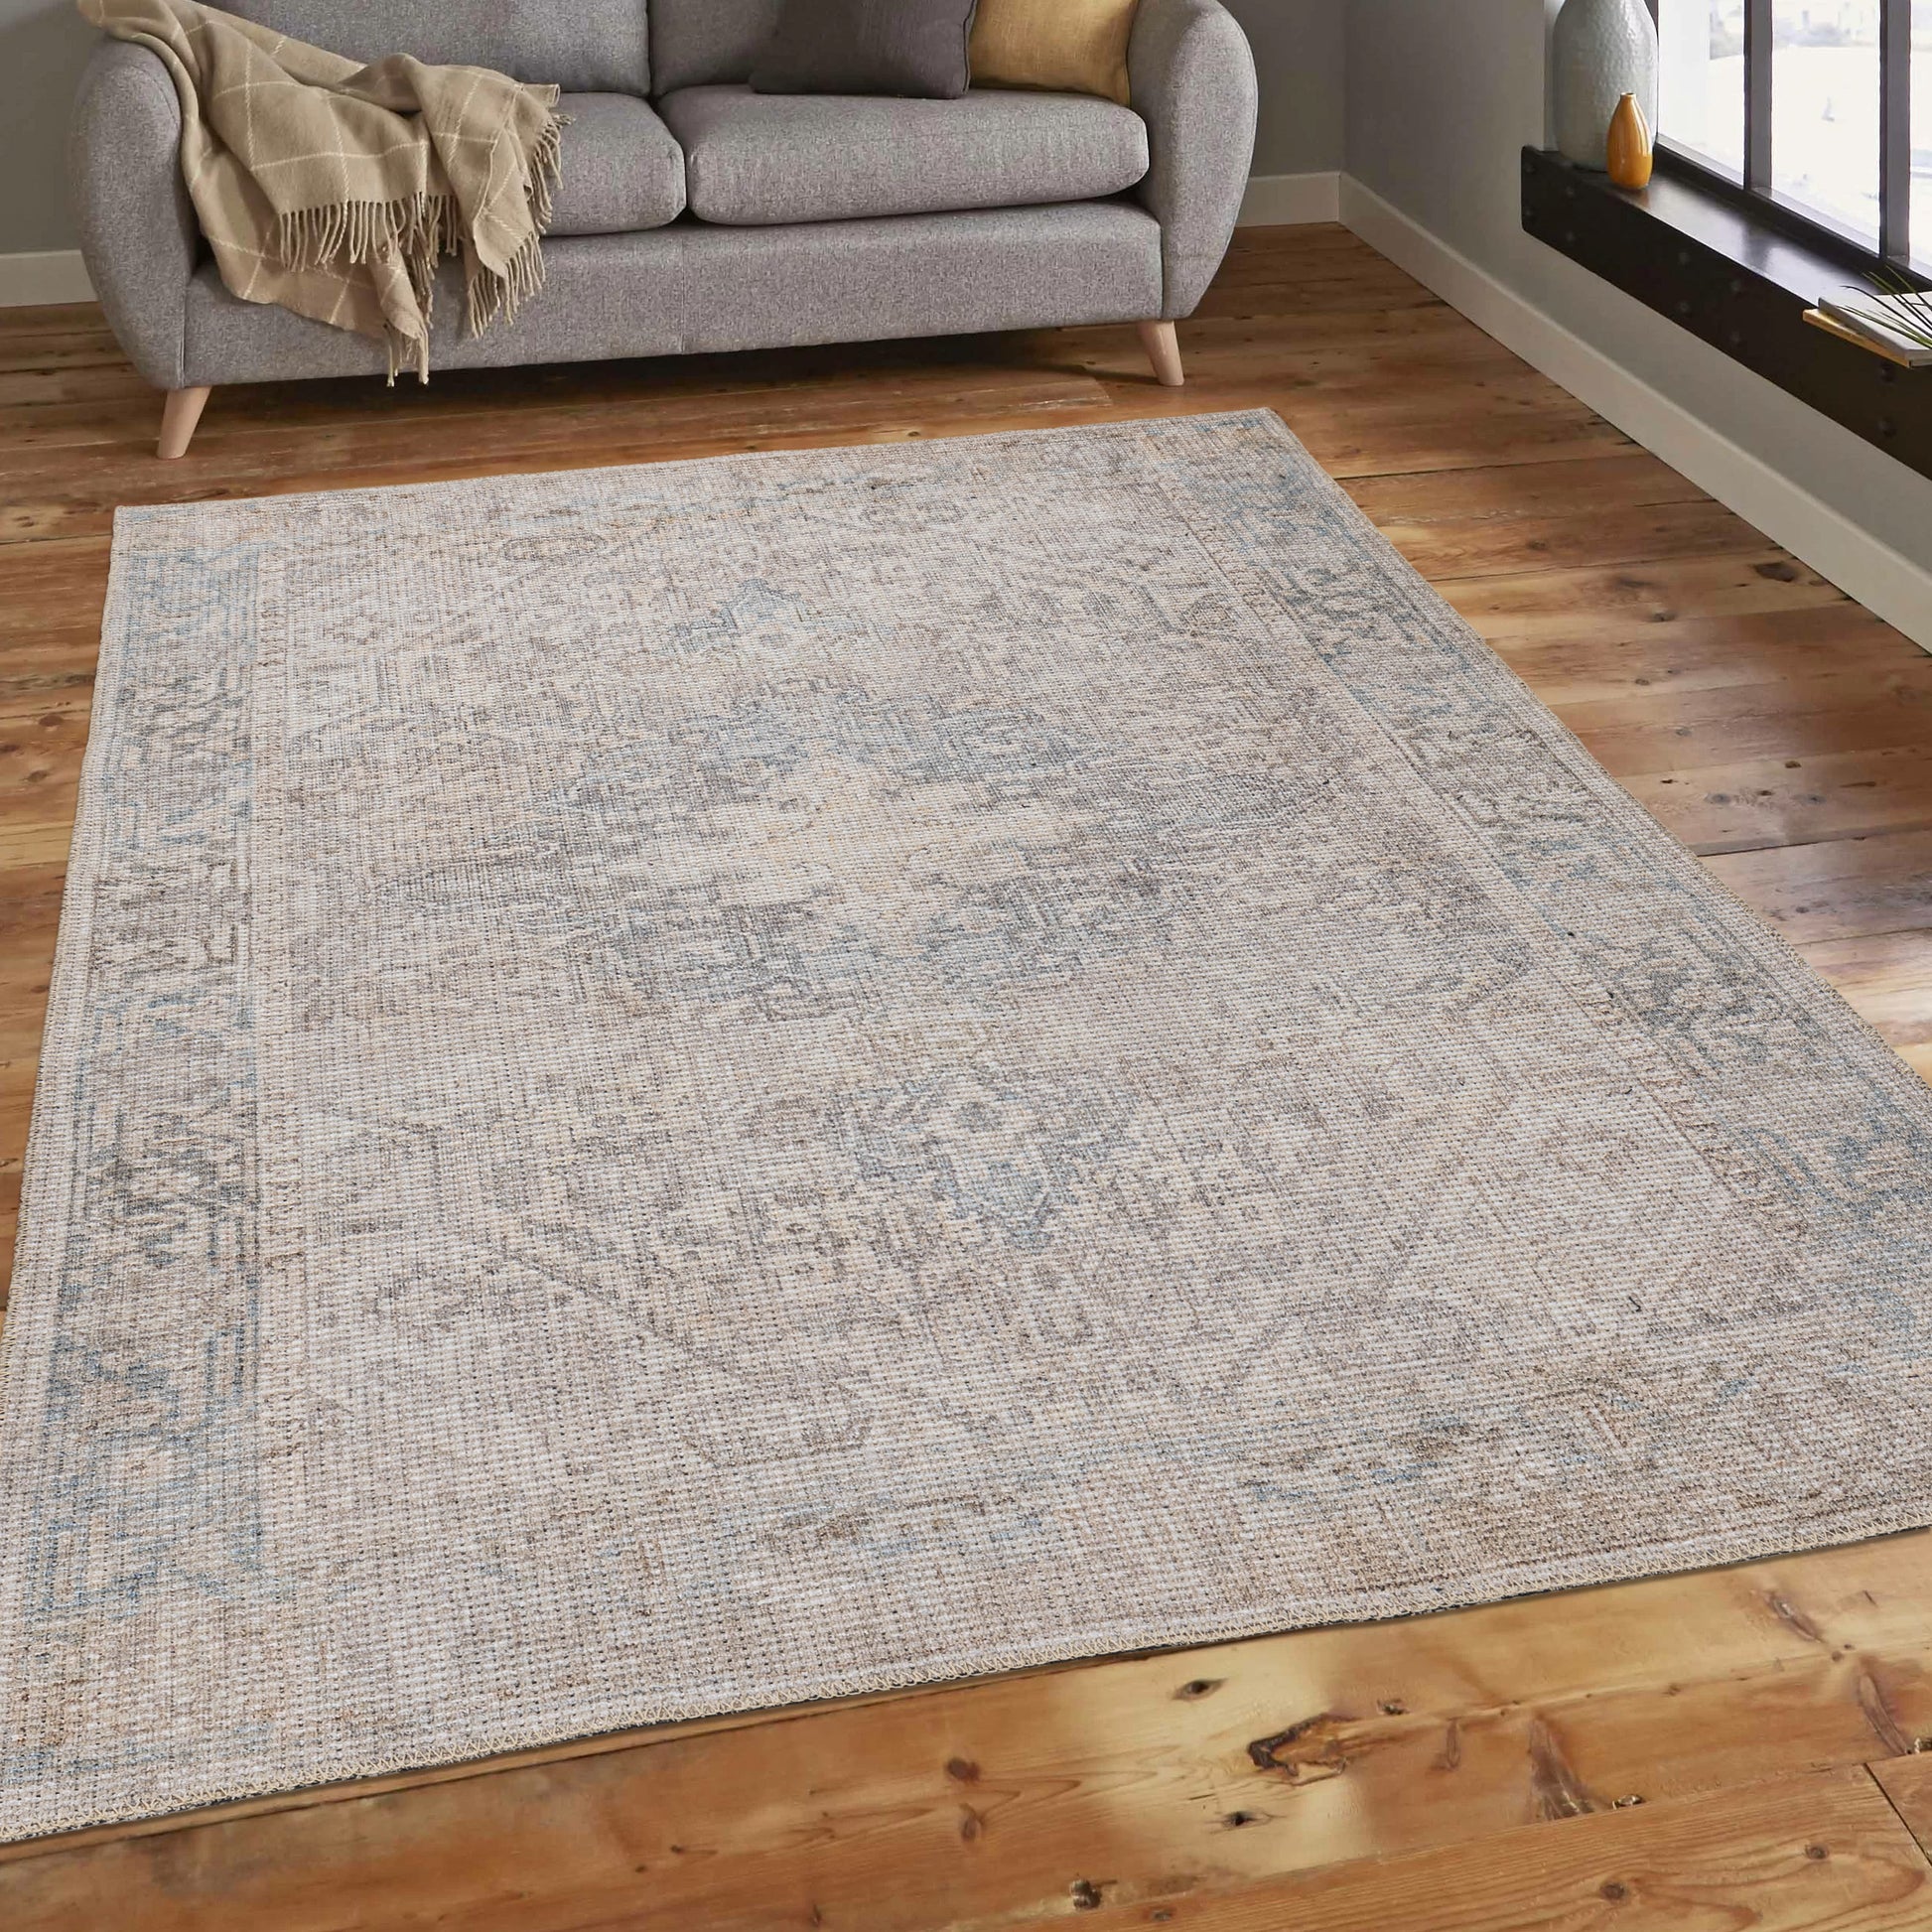 grey ivory cotton and polyster machine washable traditional rustic area rug 5x7, 5x8 ft Contemporary, Living Room Carpet, Bedroom, Home Office